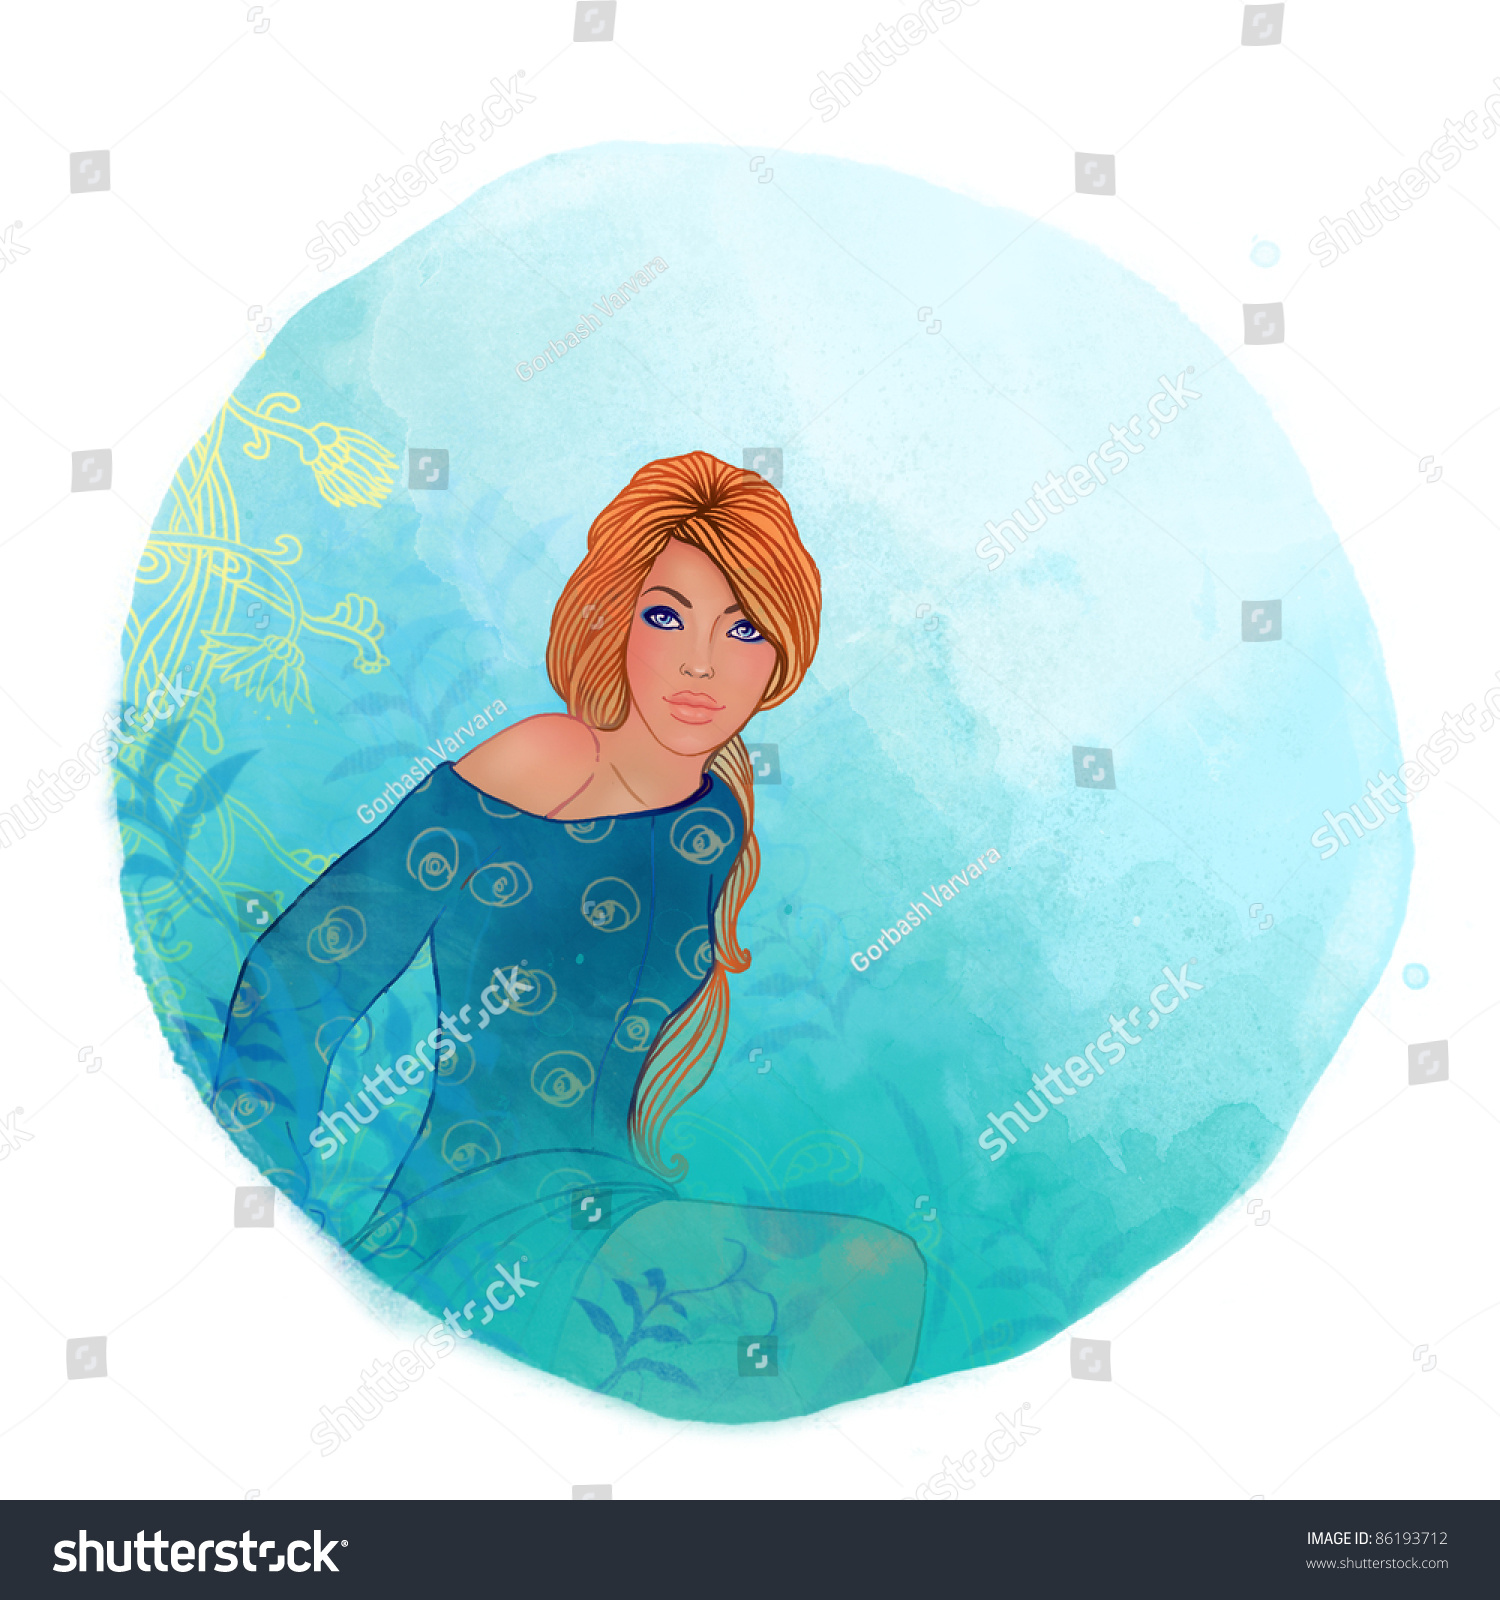 Watercolor Illustration Of Virgo Zodiac Sign As A Beautiful Girl ...